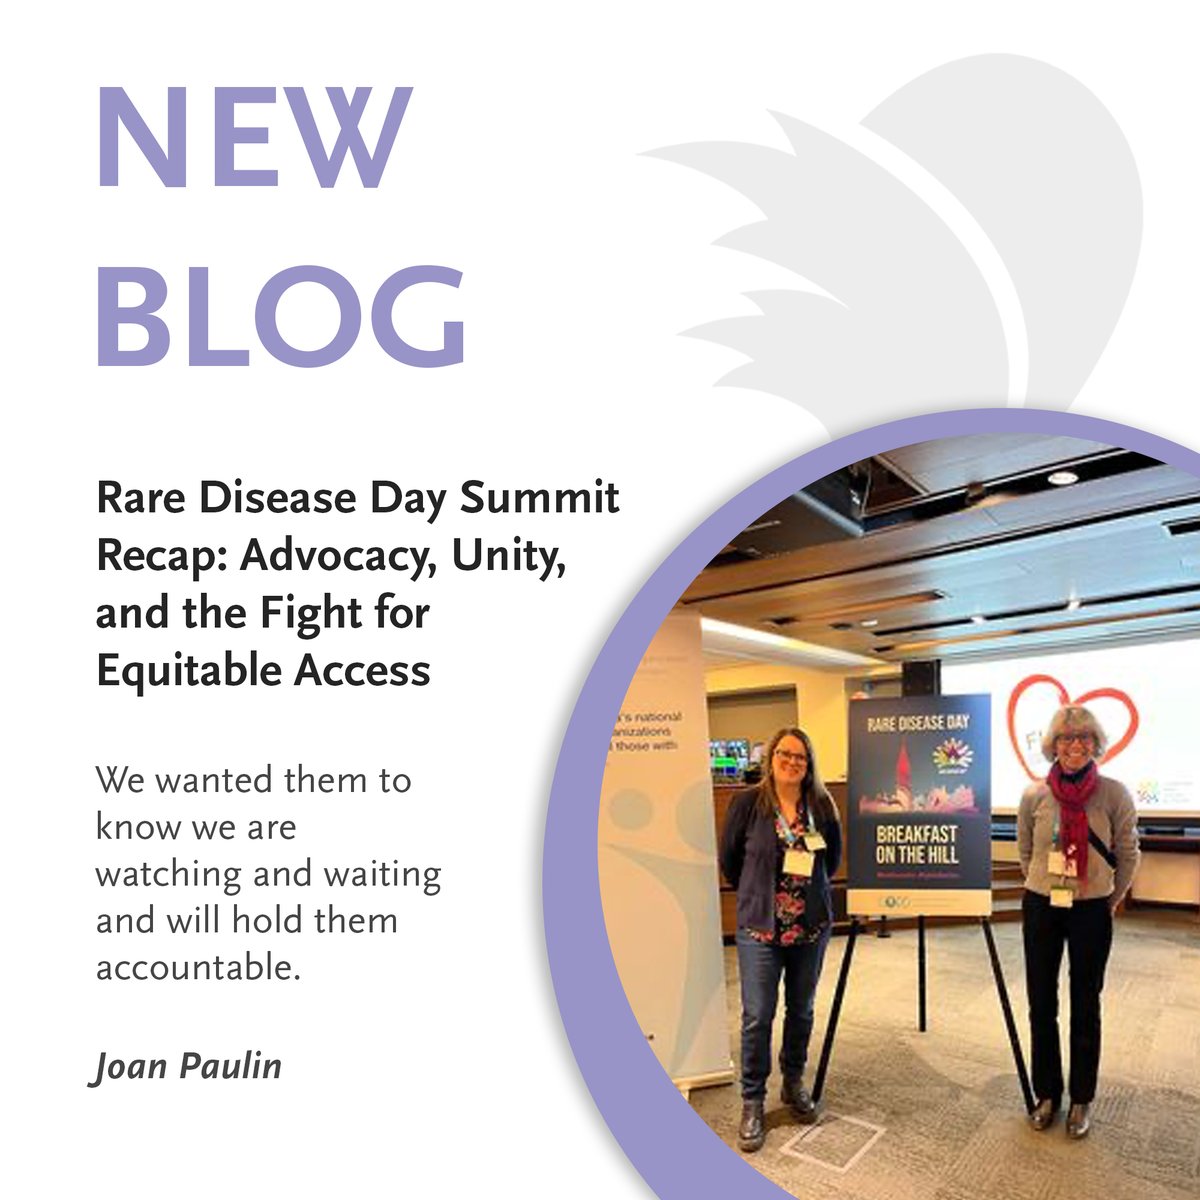 Board member Joan Paulin and #PHACanada Ambassador Jennifer Bryson attended the #RareDisease Summit, sharing insightful highlights and advocacy updates : ow.ly/Fcvh50R8MsM Support CORD's campaign 'Fight for Our Lives.' : ow.ly/8Vxv50R8MsL